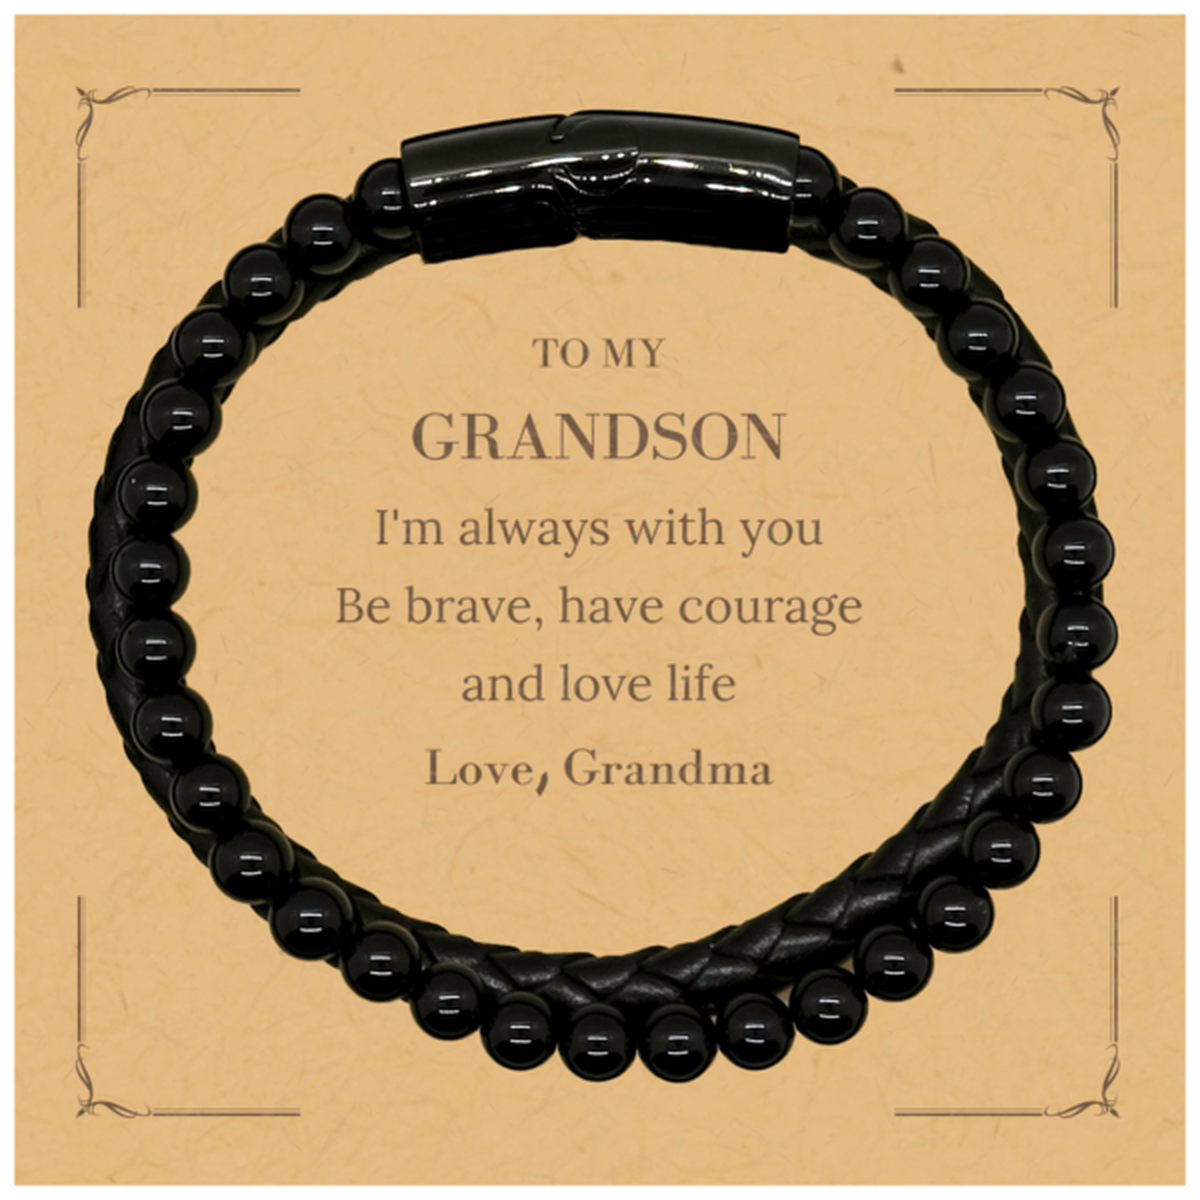 To My Grandson Gifts from Grandma, Unique Stone Leather Bracelets Inspirational Christmas Birthday Graduation Gifts for Grandson I'm always with you. Be brave, have courage and love life. Love, Grandma